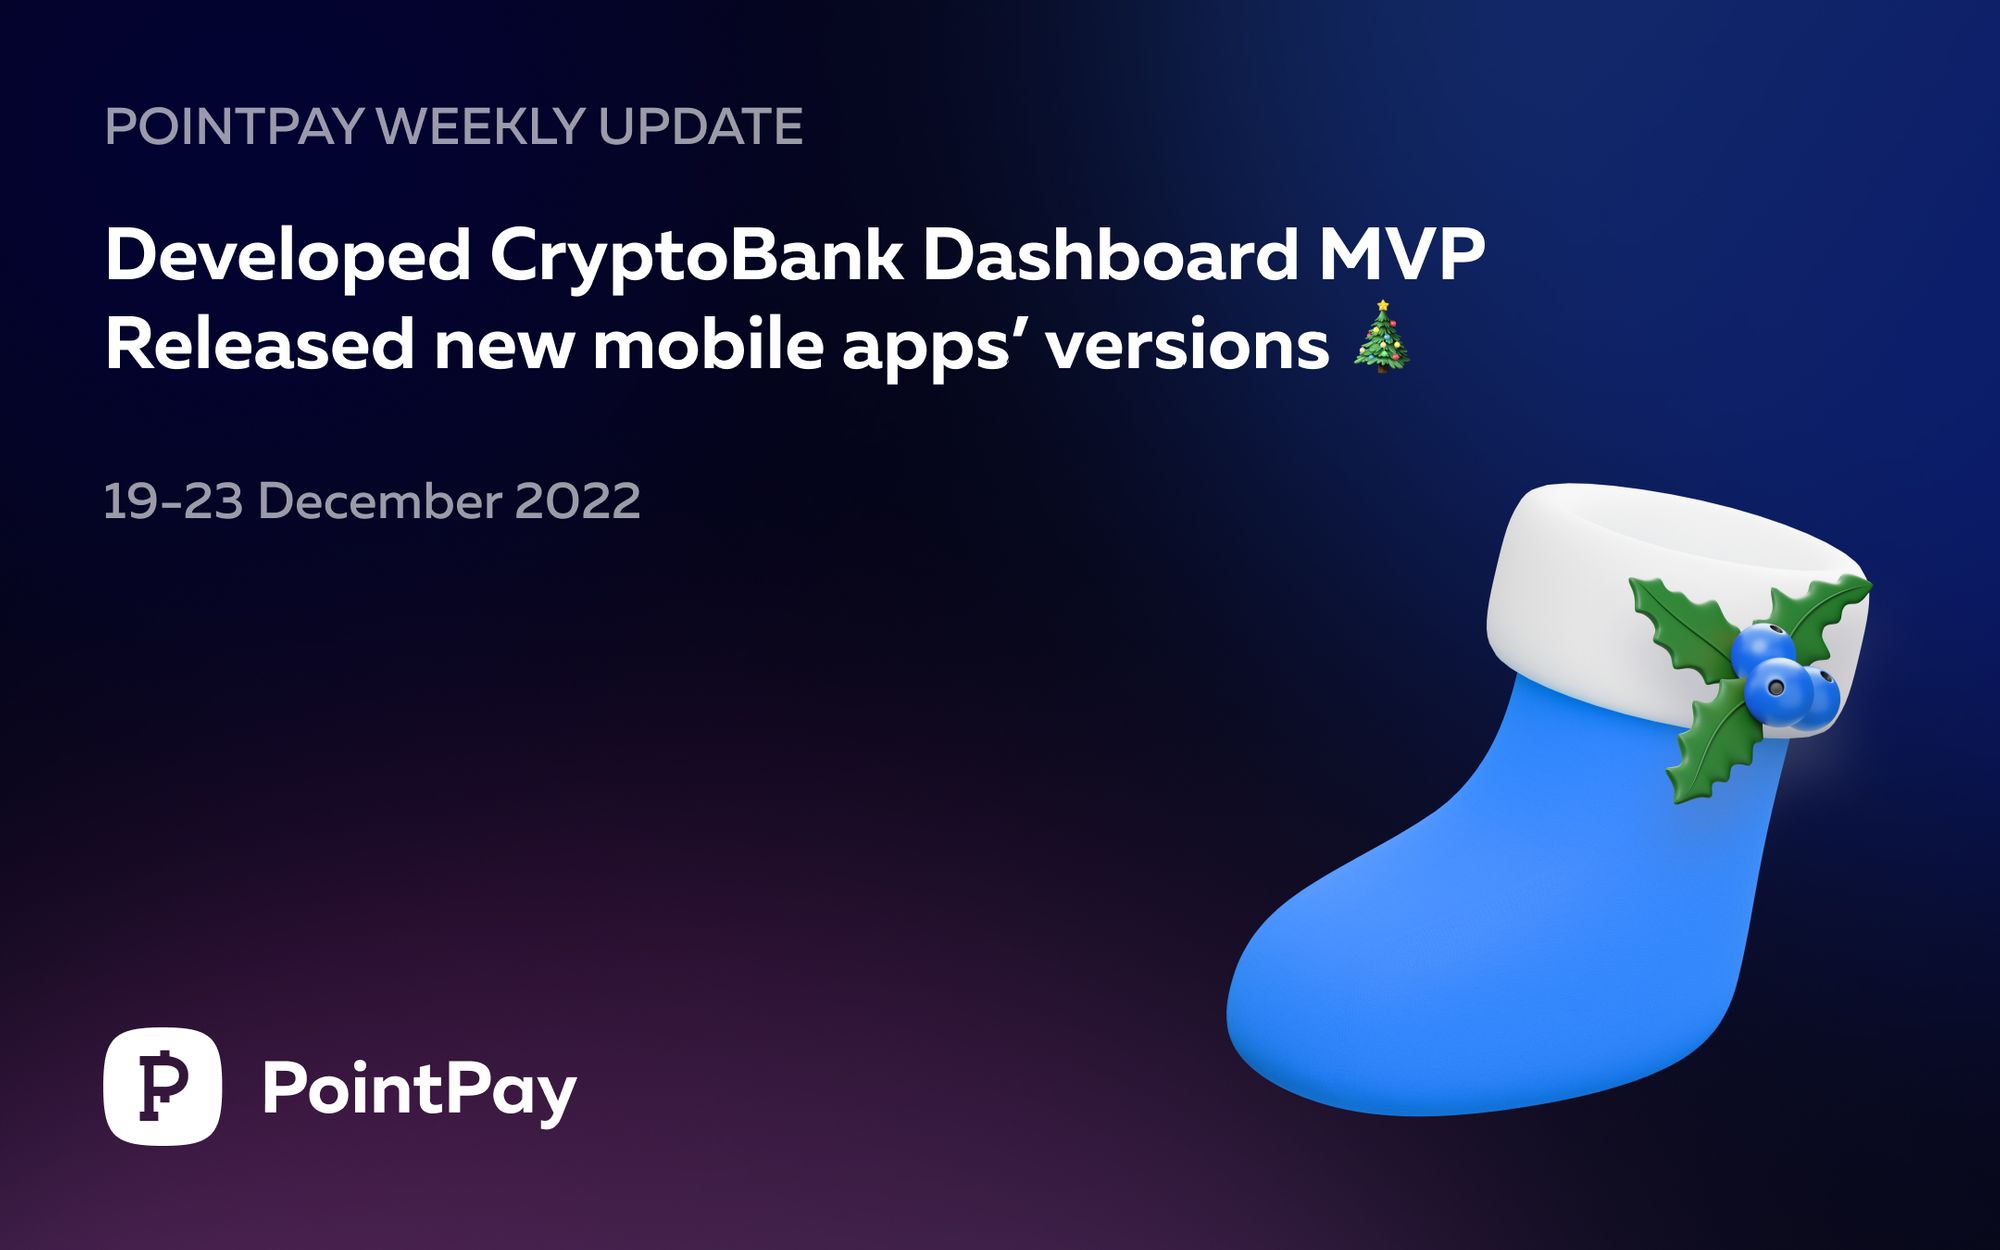 PointPay Weekly Update (19 - 23 December 2022)